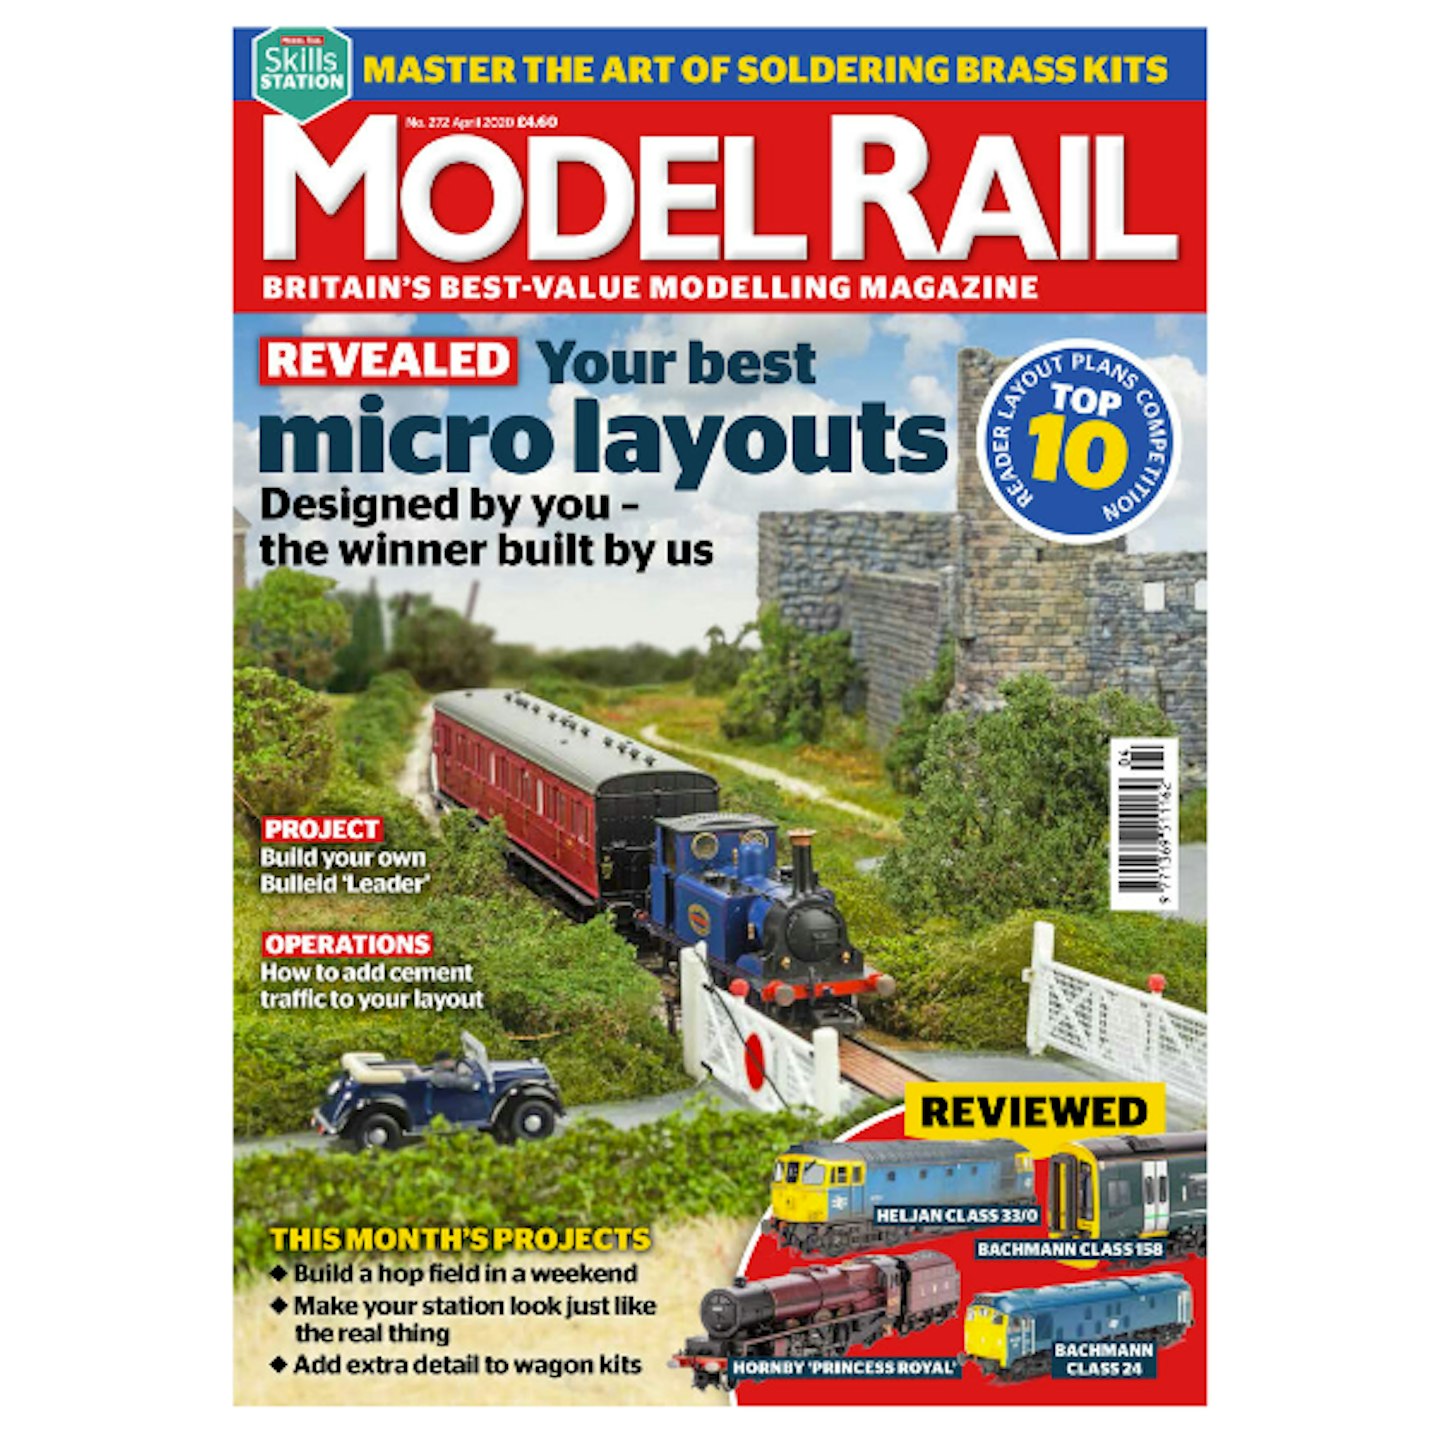 Model Railway Magazine Subscription, Subscribe and get a Soldering Iron, greatmagazines.co.uk